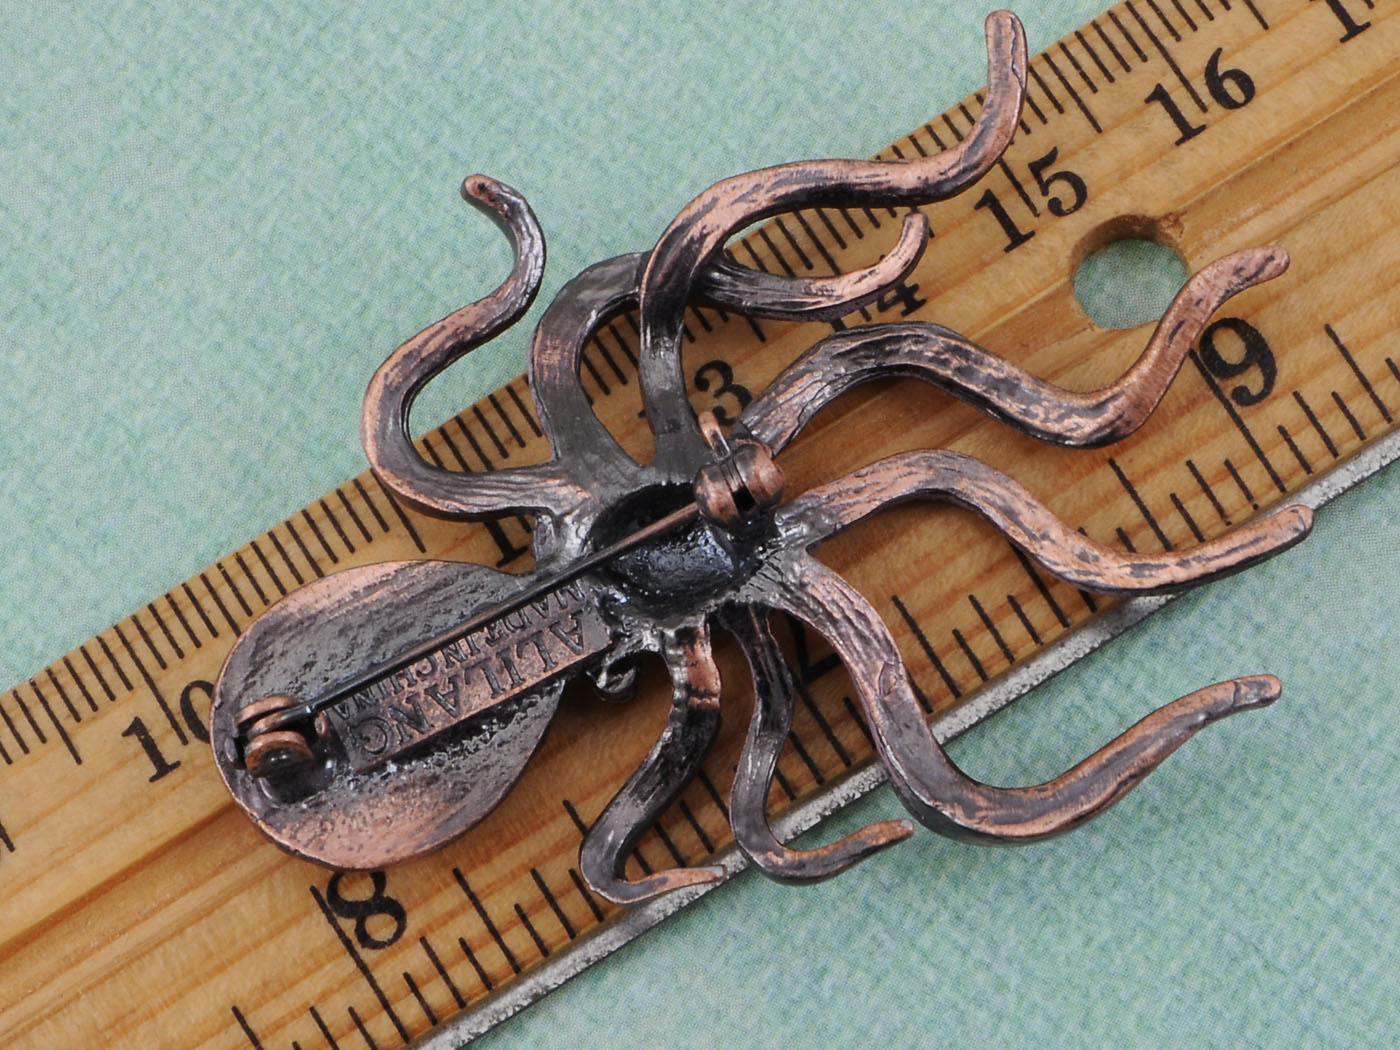 Copper Topaz Colored Nautical Octopus Legs Brooch Pin